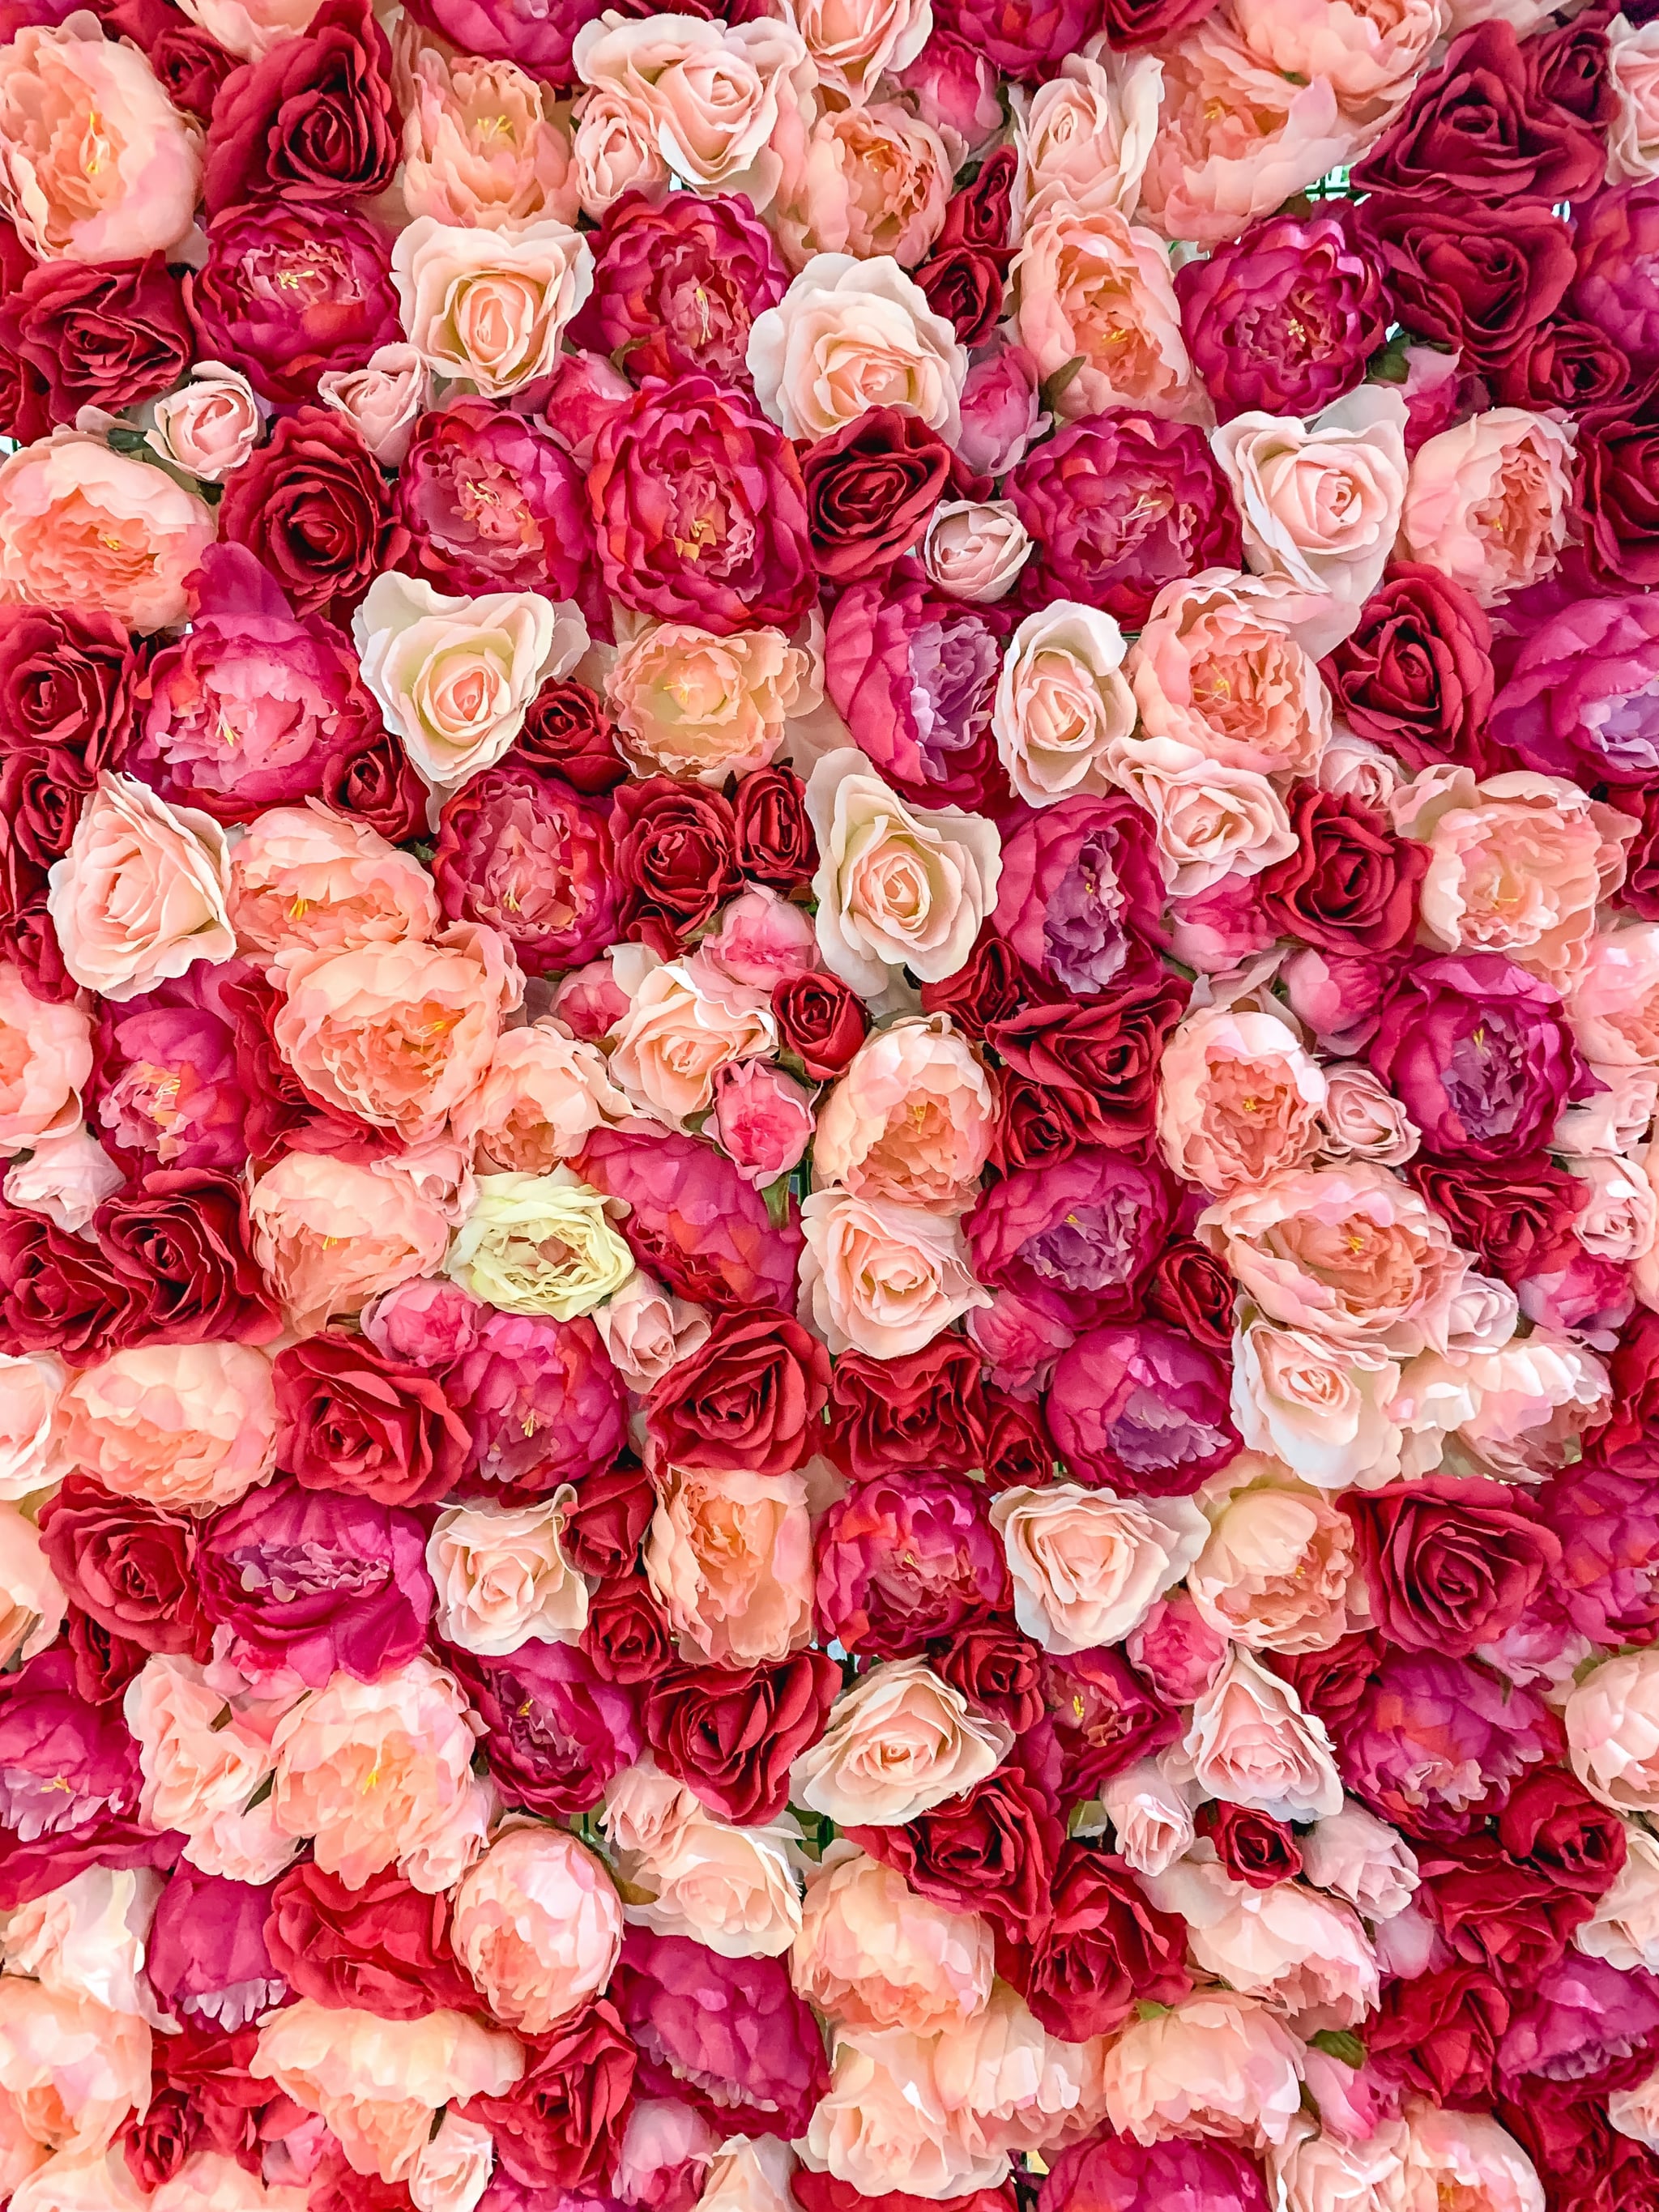 Valentine's Day Roses iPhone Wallpaper. The Dreamiest iPhone Wallpaper For Valentine's Day That Fit Any Aesthetic